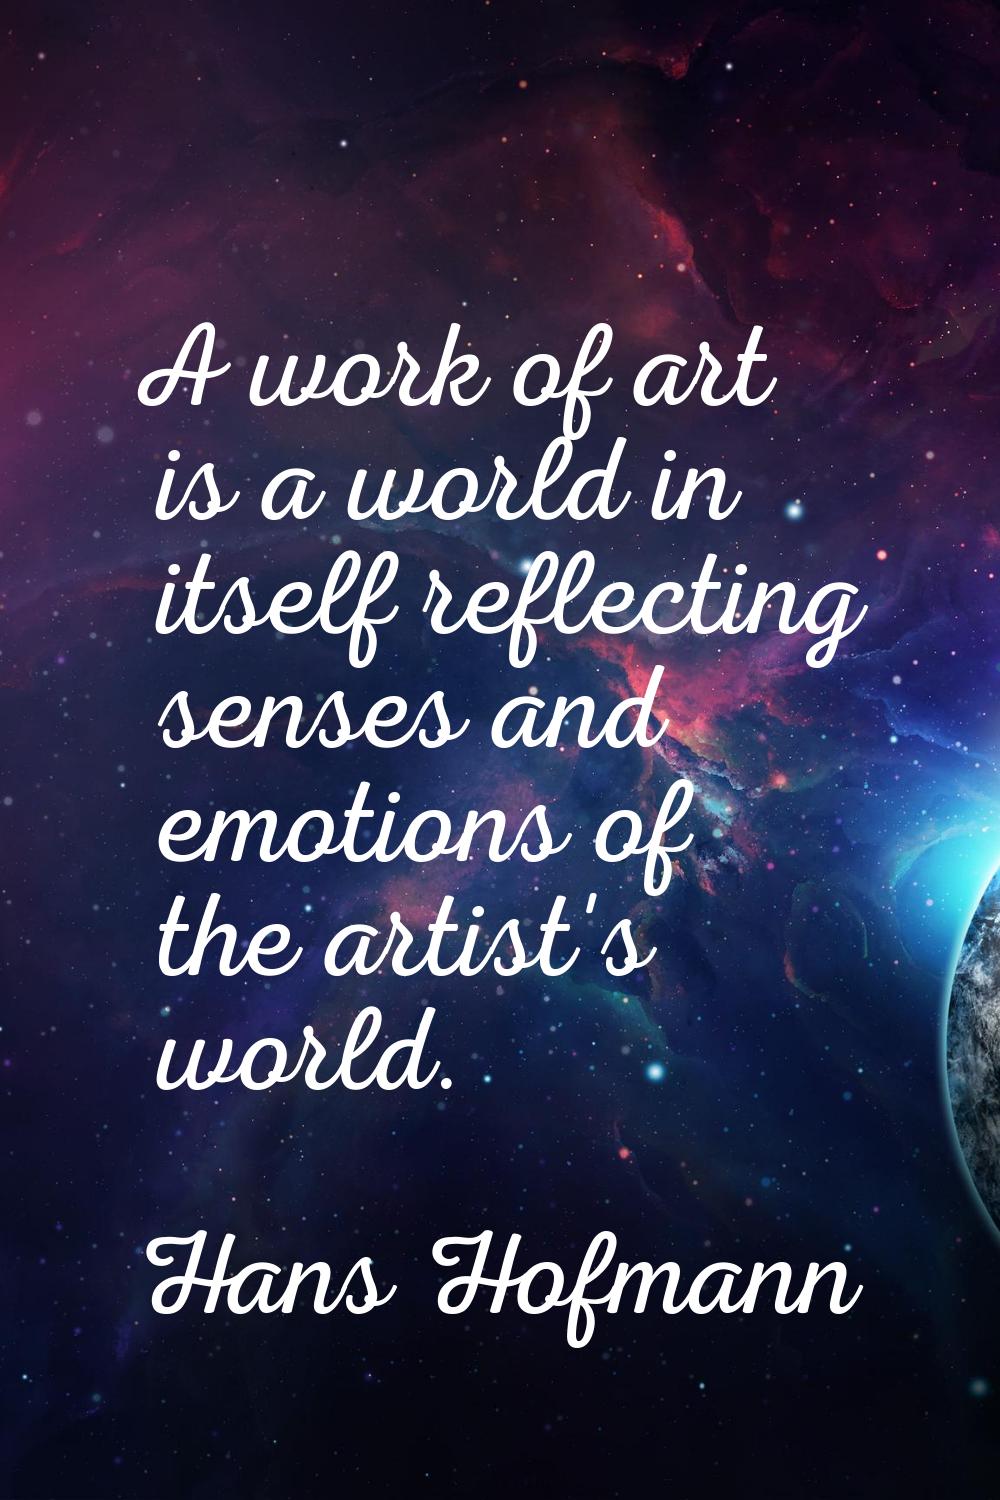 A work of art is a world in itself reflecting senses and emotions of the artist's world.